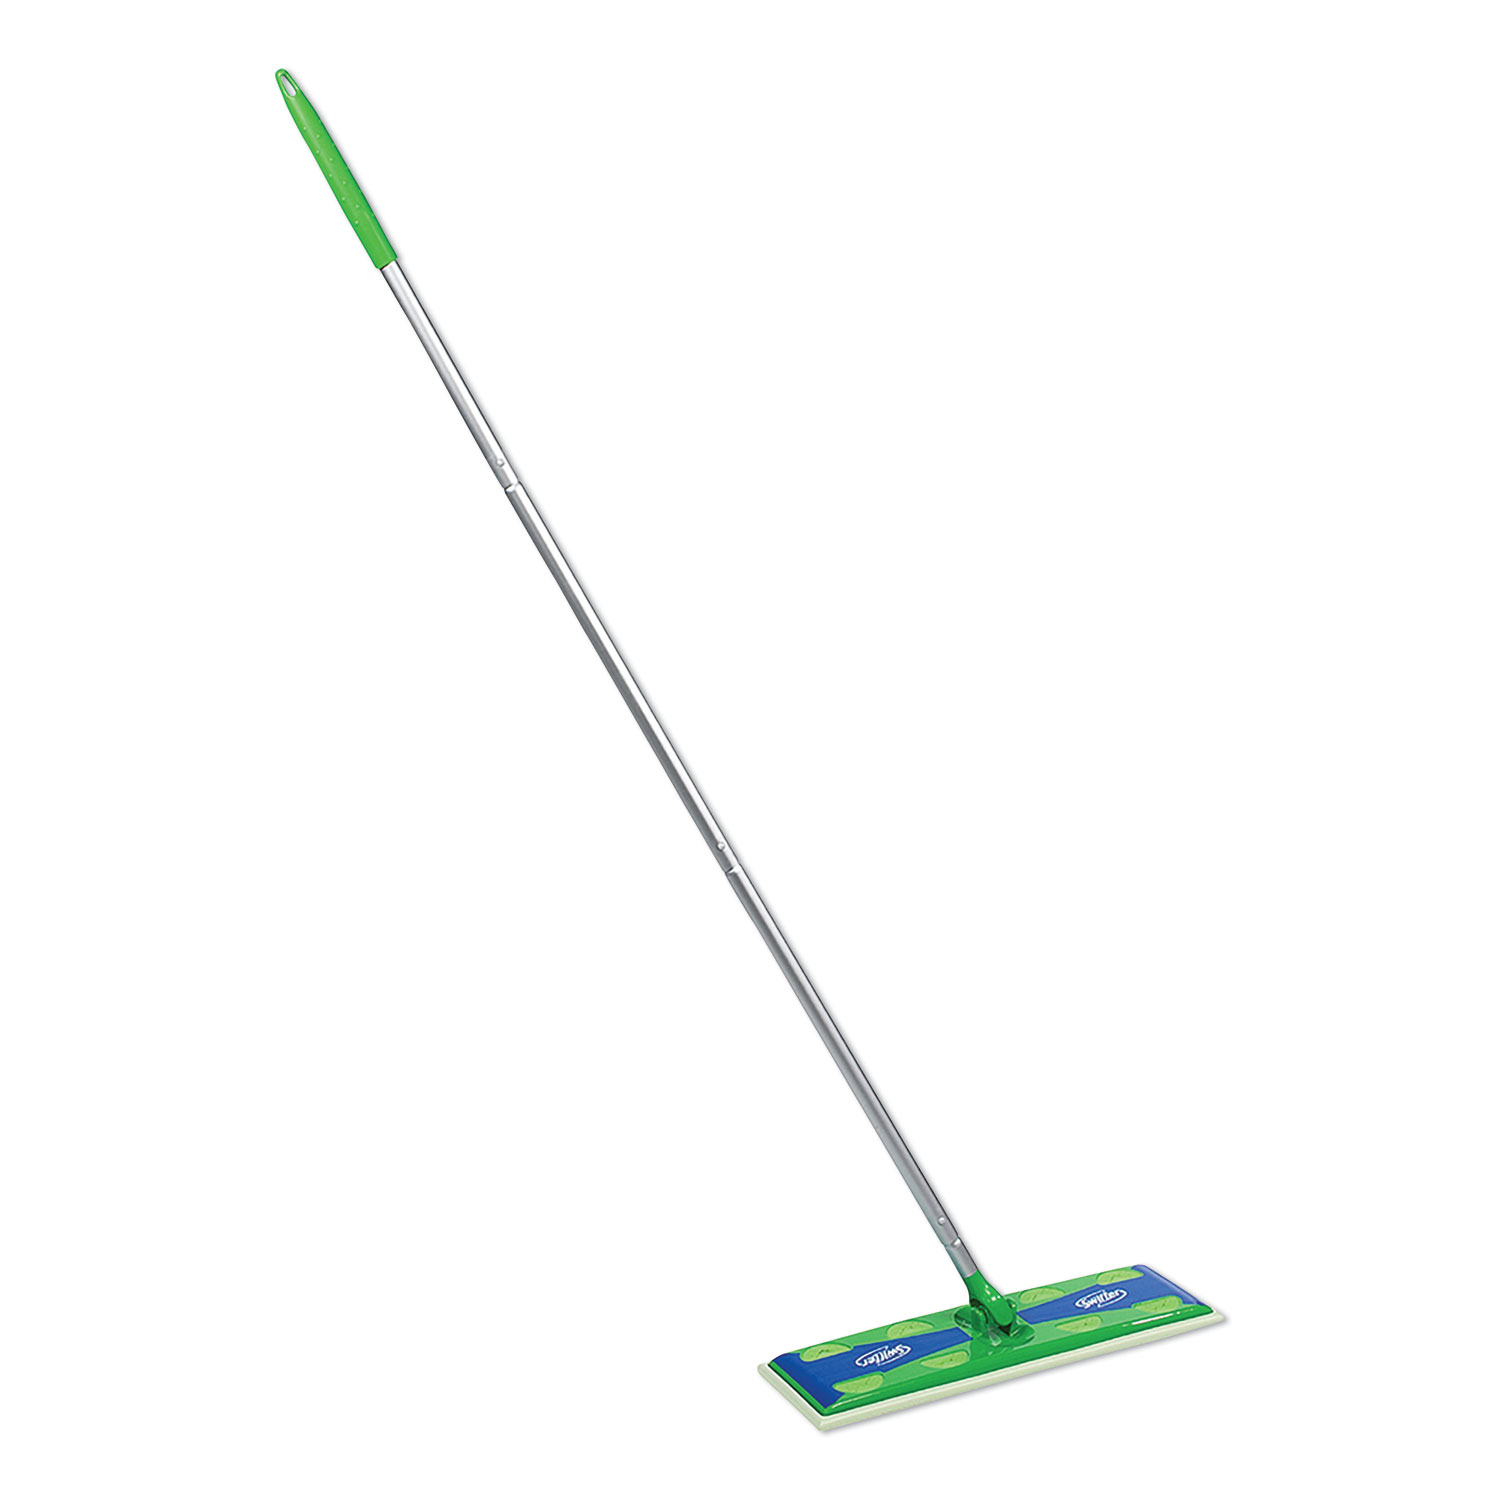  Swiffer 37108 Sweeper Mop, Professional Max Sweeper, 17 Wide Mop (PGC37108) 